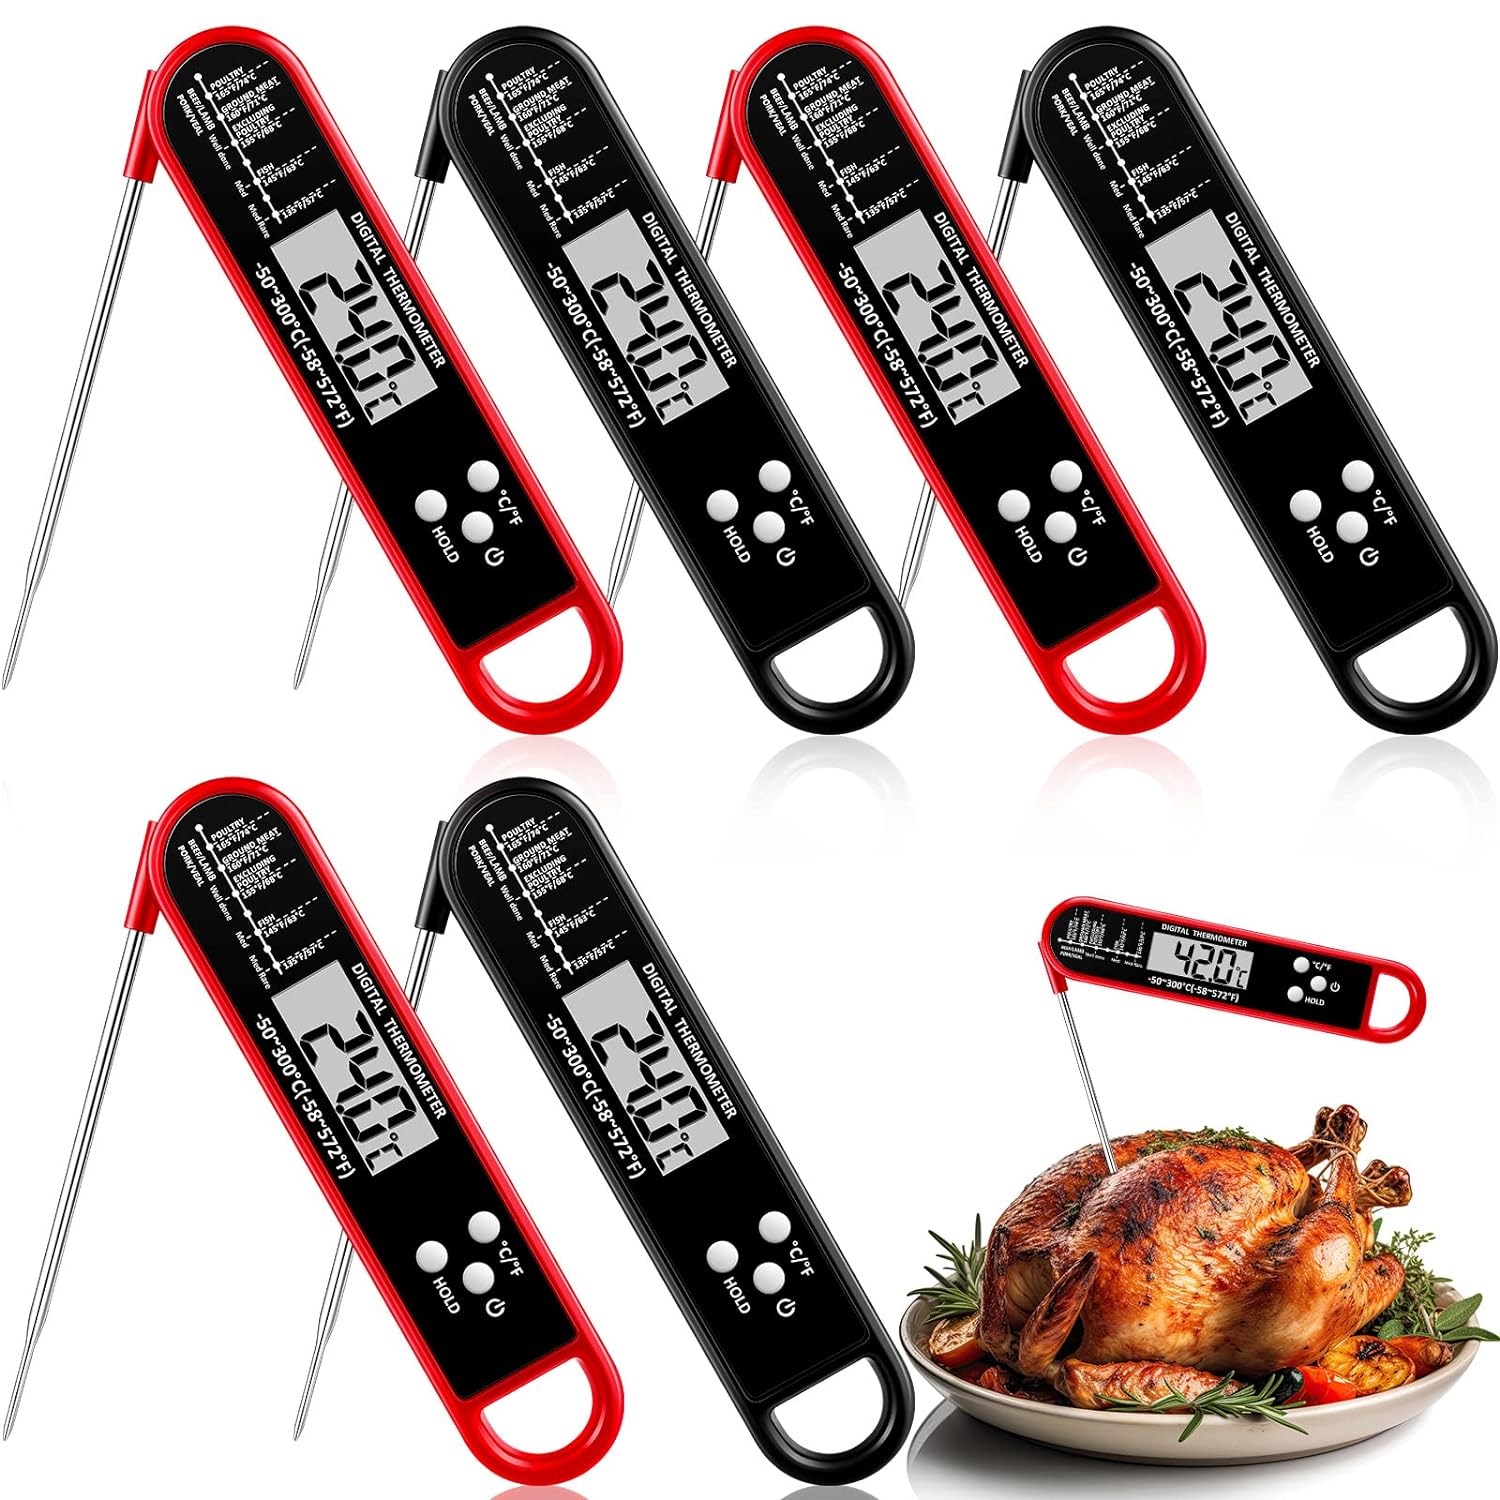 Xuhal 6 Pieces Digital Food Thermometer Instant Read Meat Kitchen Thermometer for Grill Cooking BBQ Waterproof Fast Cooking Thermometer with Foldable Long Probe Magnet Calibration Turkey Outdoor Fry